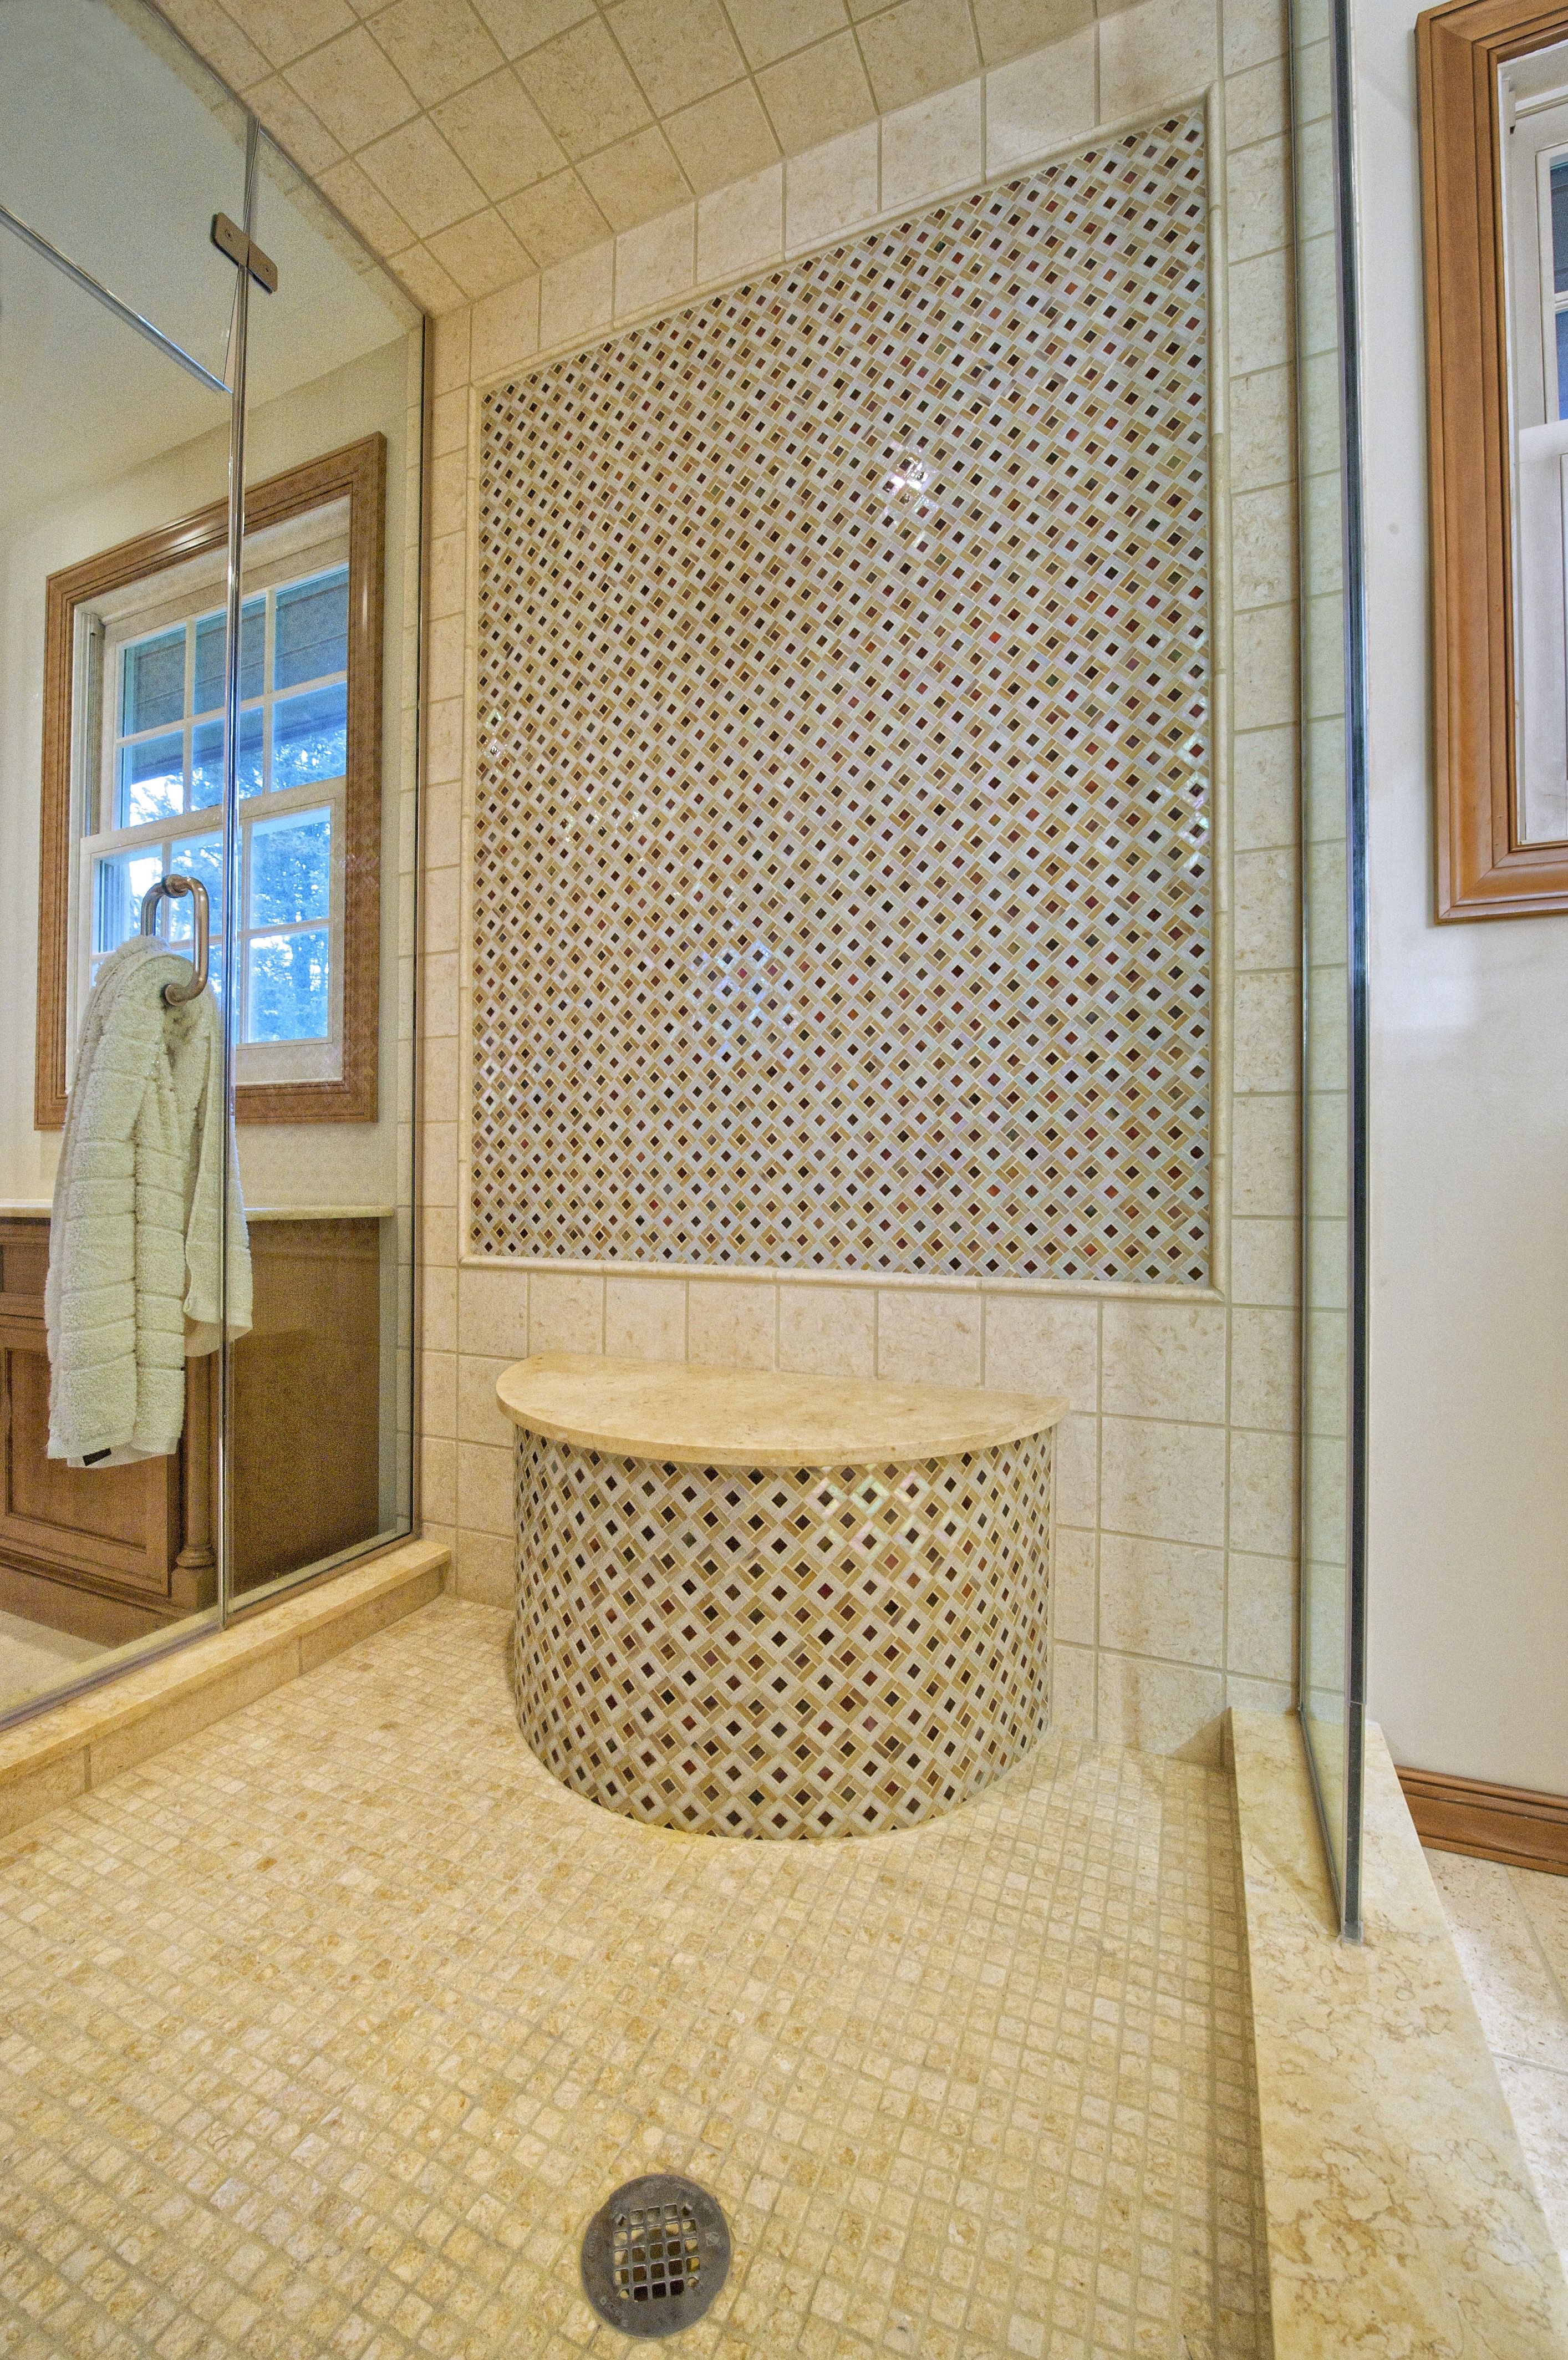 Mosaic Tile Accent Wall In Shower (View 16 of 21)